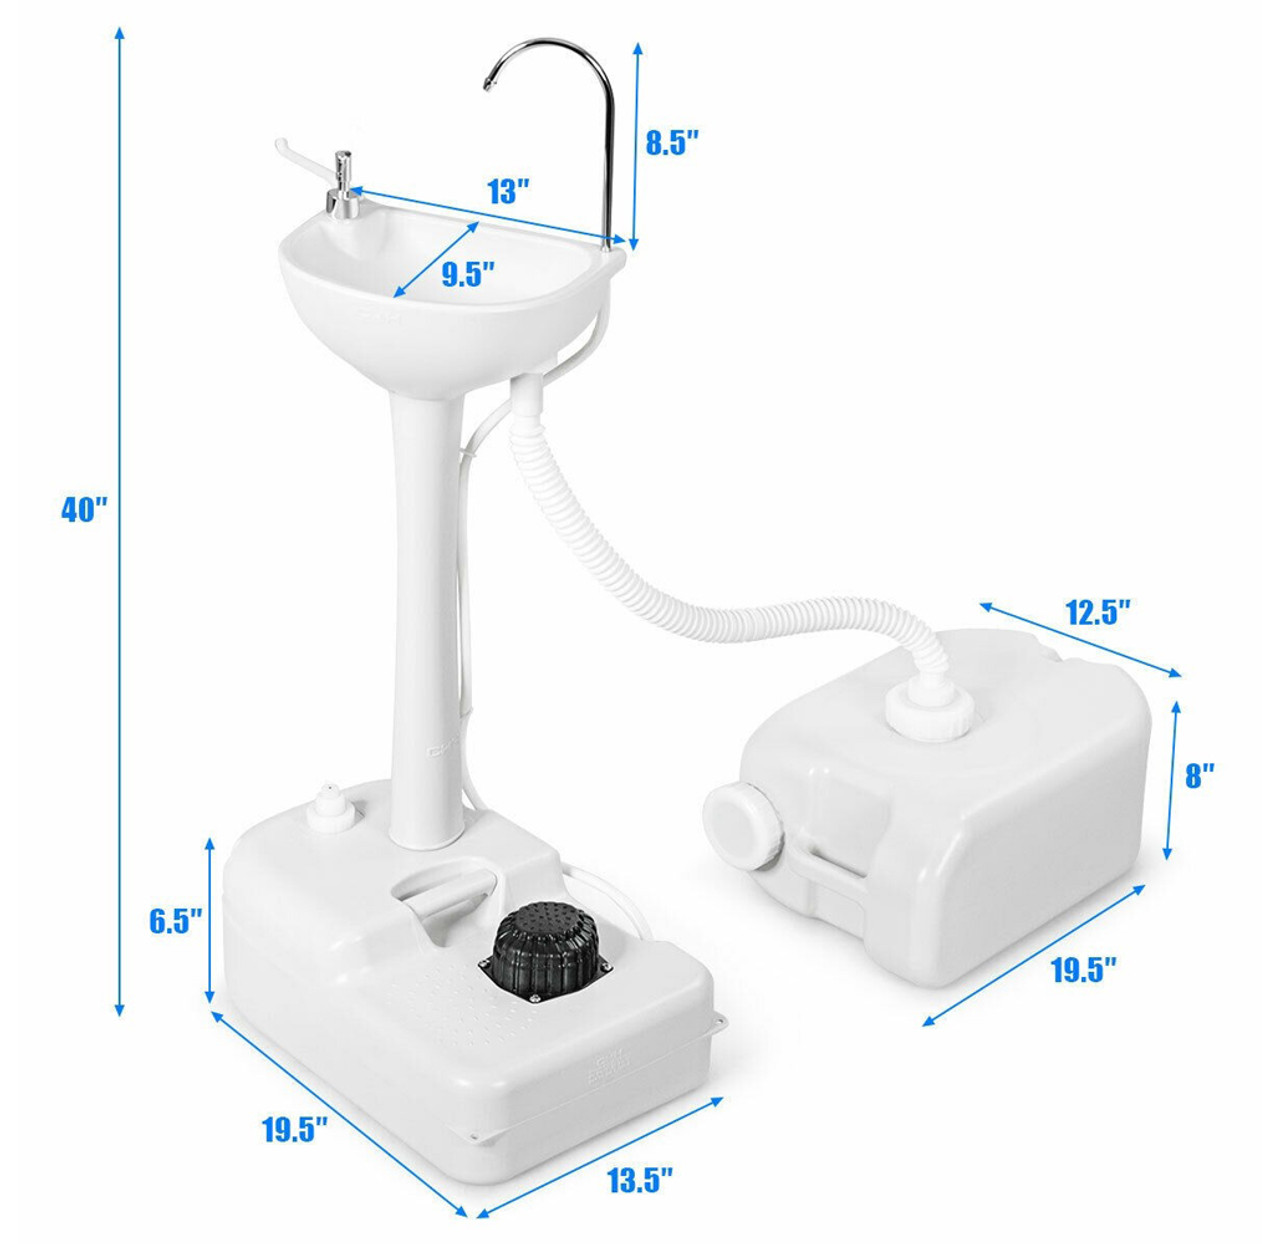 Portable Standing Wash Sink product image